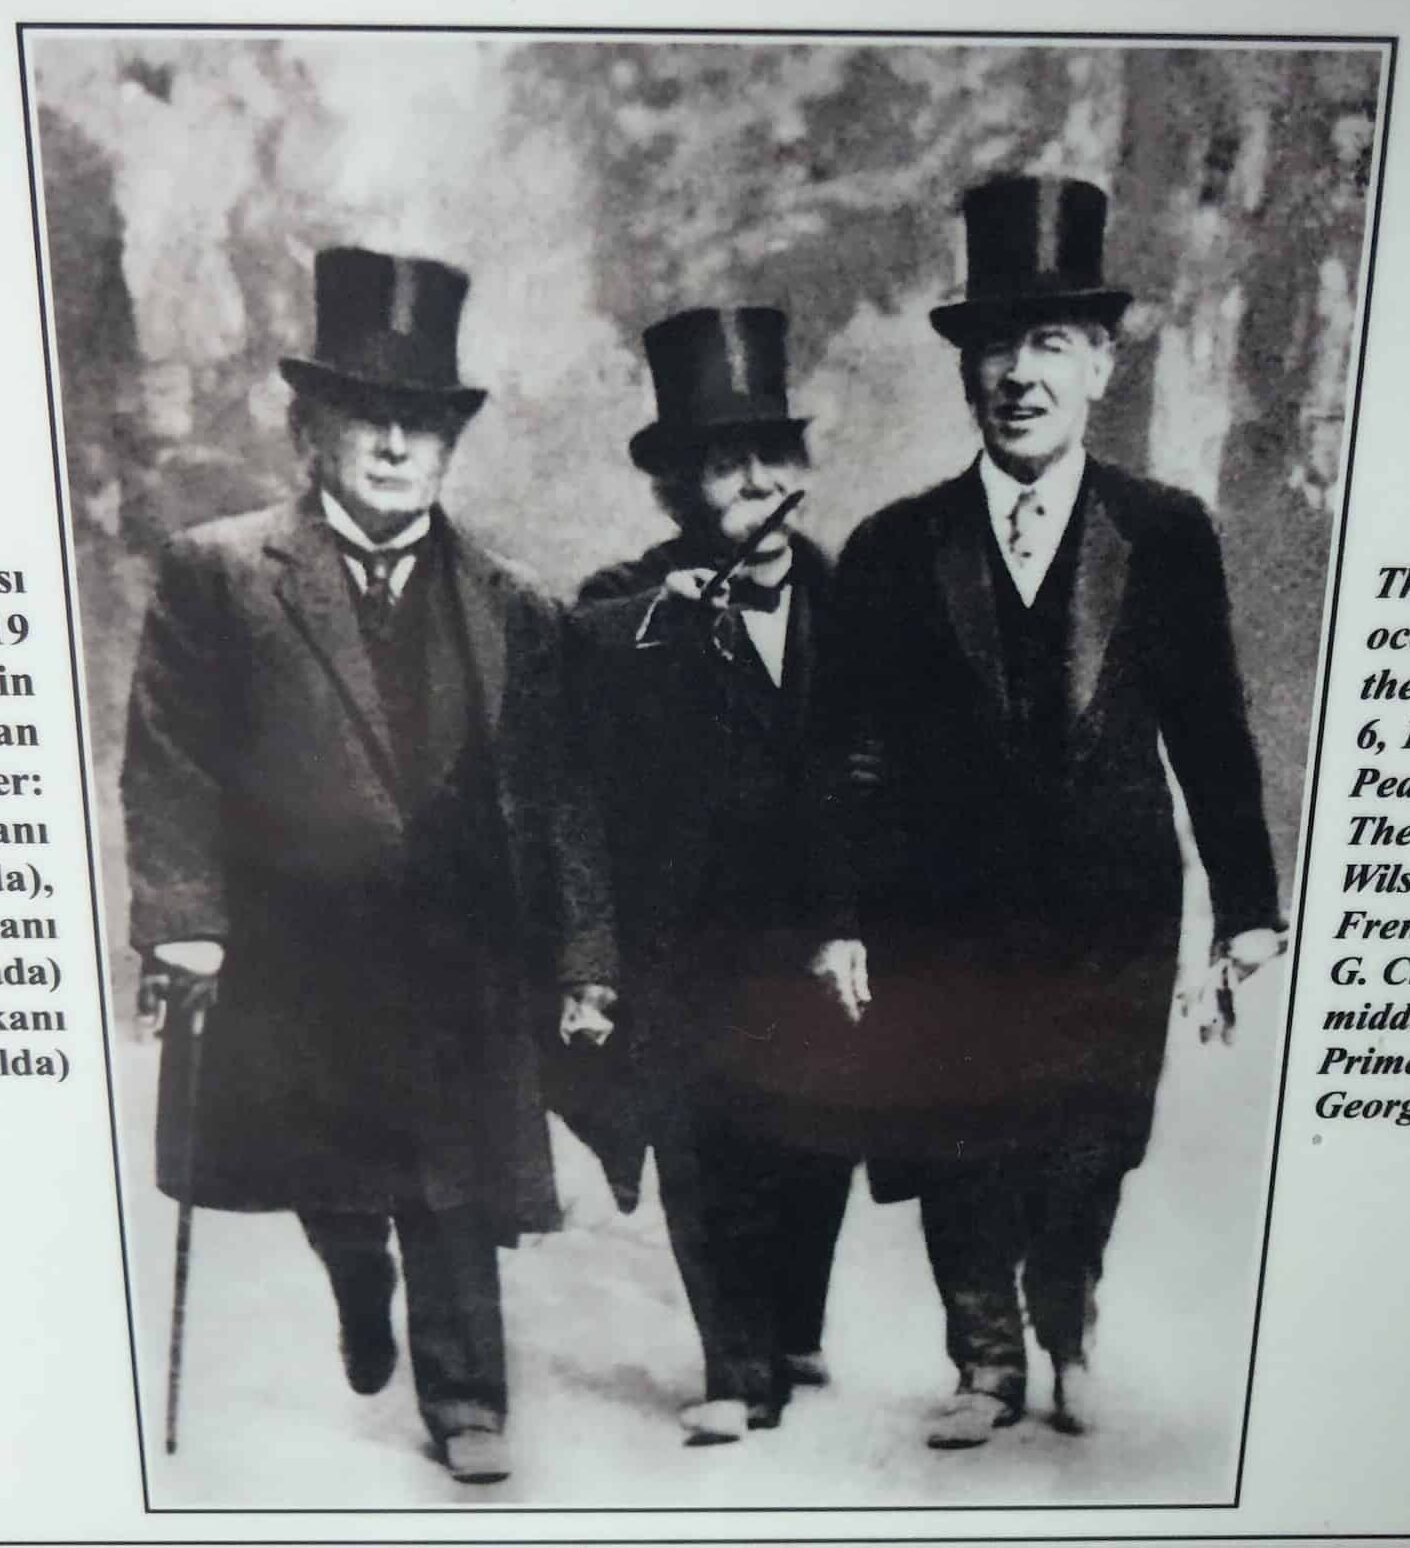 Photo of Lloyd George (left), Georges Clemenceau (center), and Woodrow Wilson (right) at the Paris Peace Conference on May 6, 1919 at the Atatürk and War of Independence Museum at Anıtkabir in Ankara, Turkey